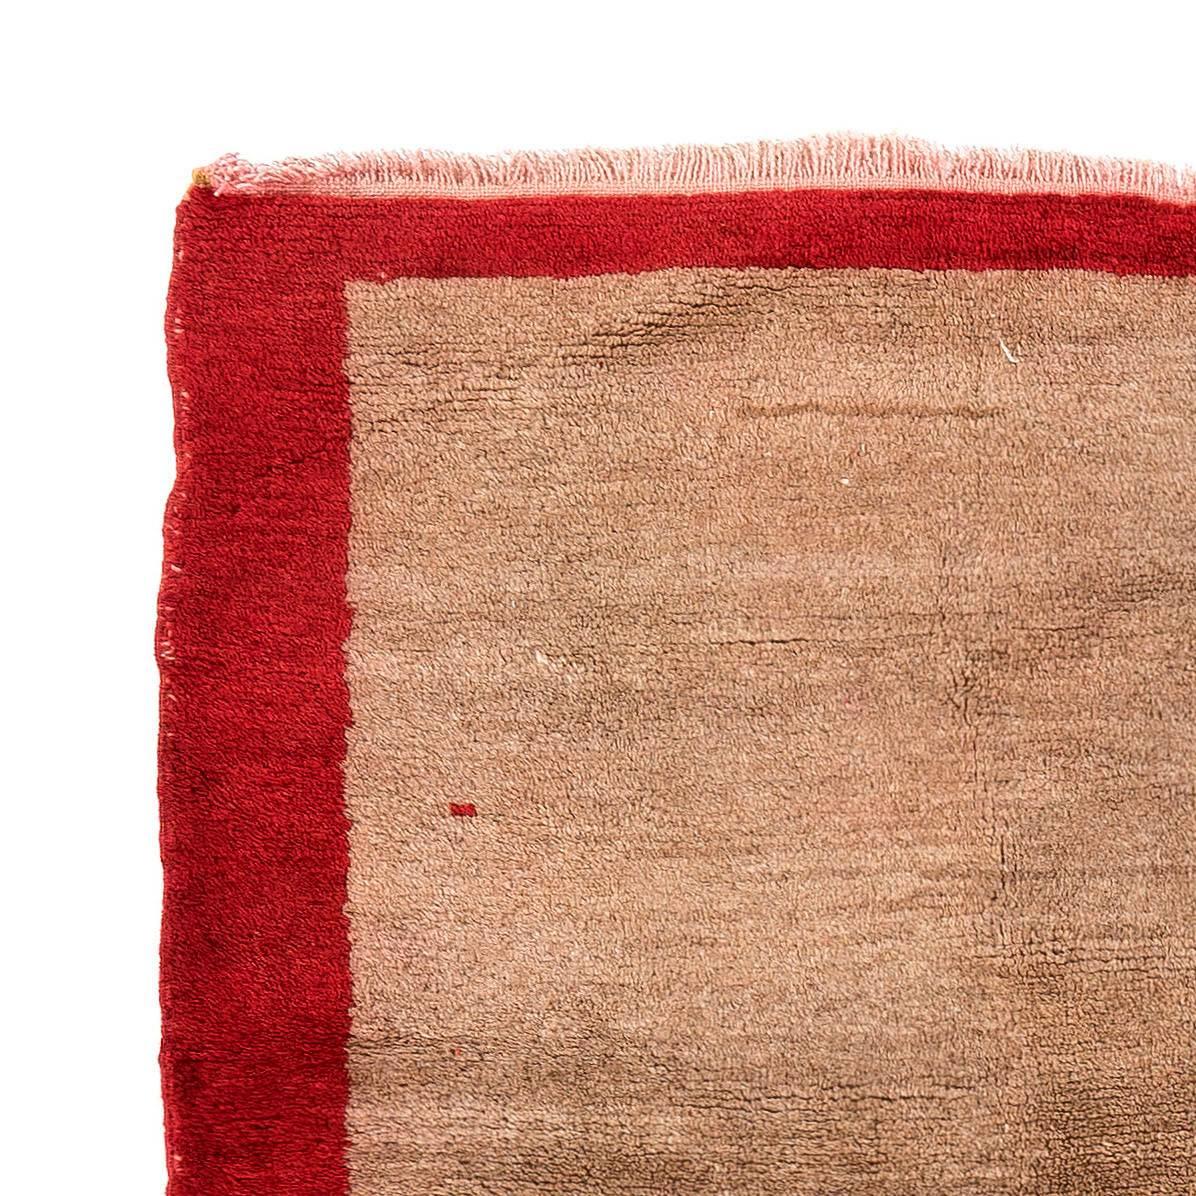 A vintage hand-knotted Tulu (Turkish word for soft, cozy, high piled) rug from Konya in Central Anatolia, Turkey. Measures: 3.3 x 4.4 Ft.

These simple, functional, small rugs with plain, clear design and lustrous wool pile were made by nomads and